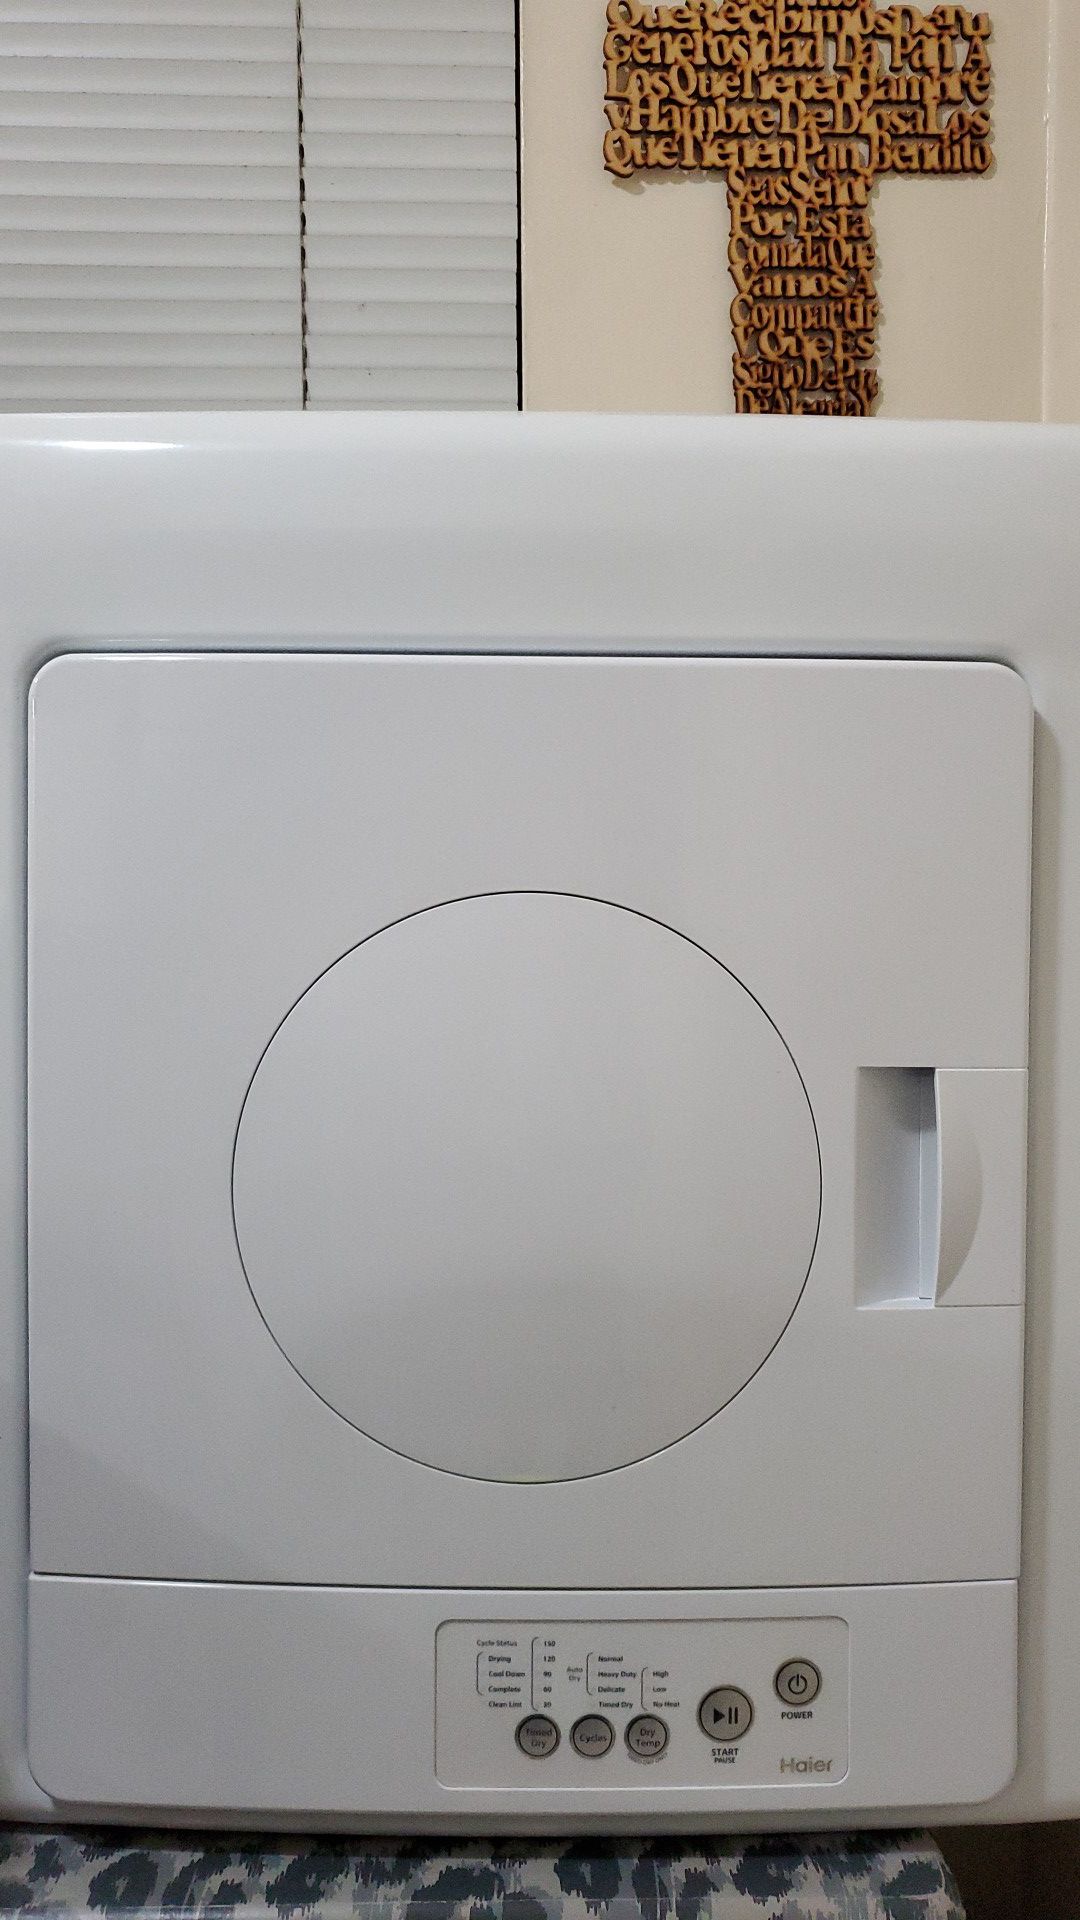 Small apartment dryer